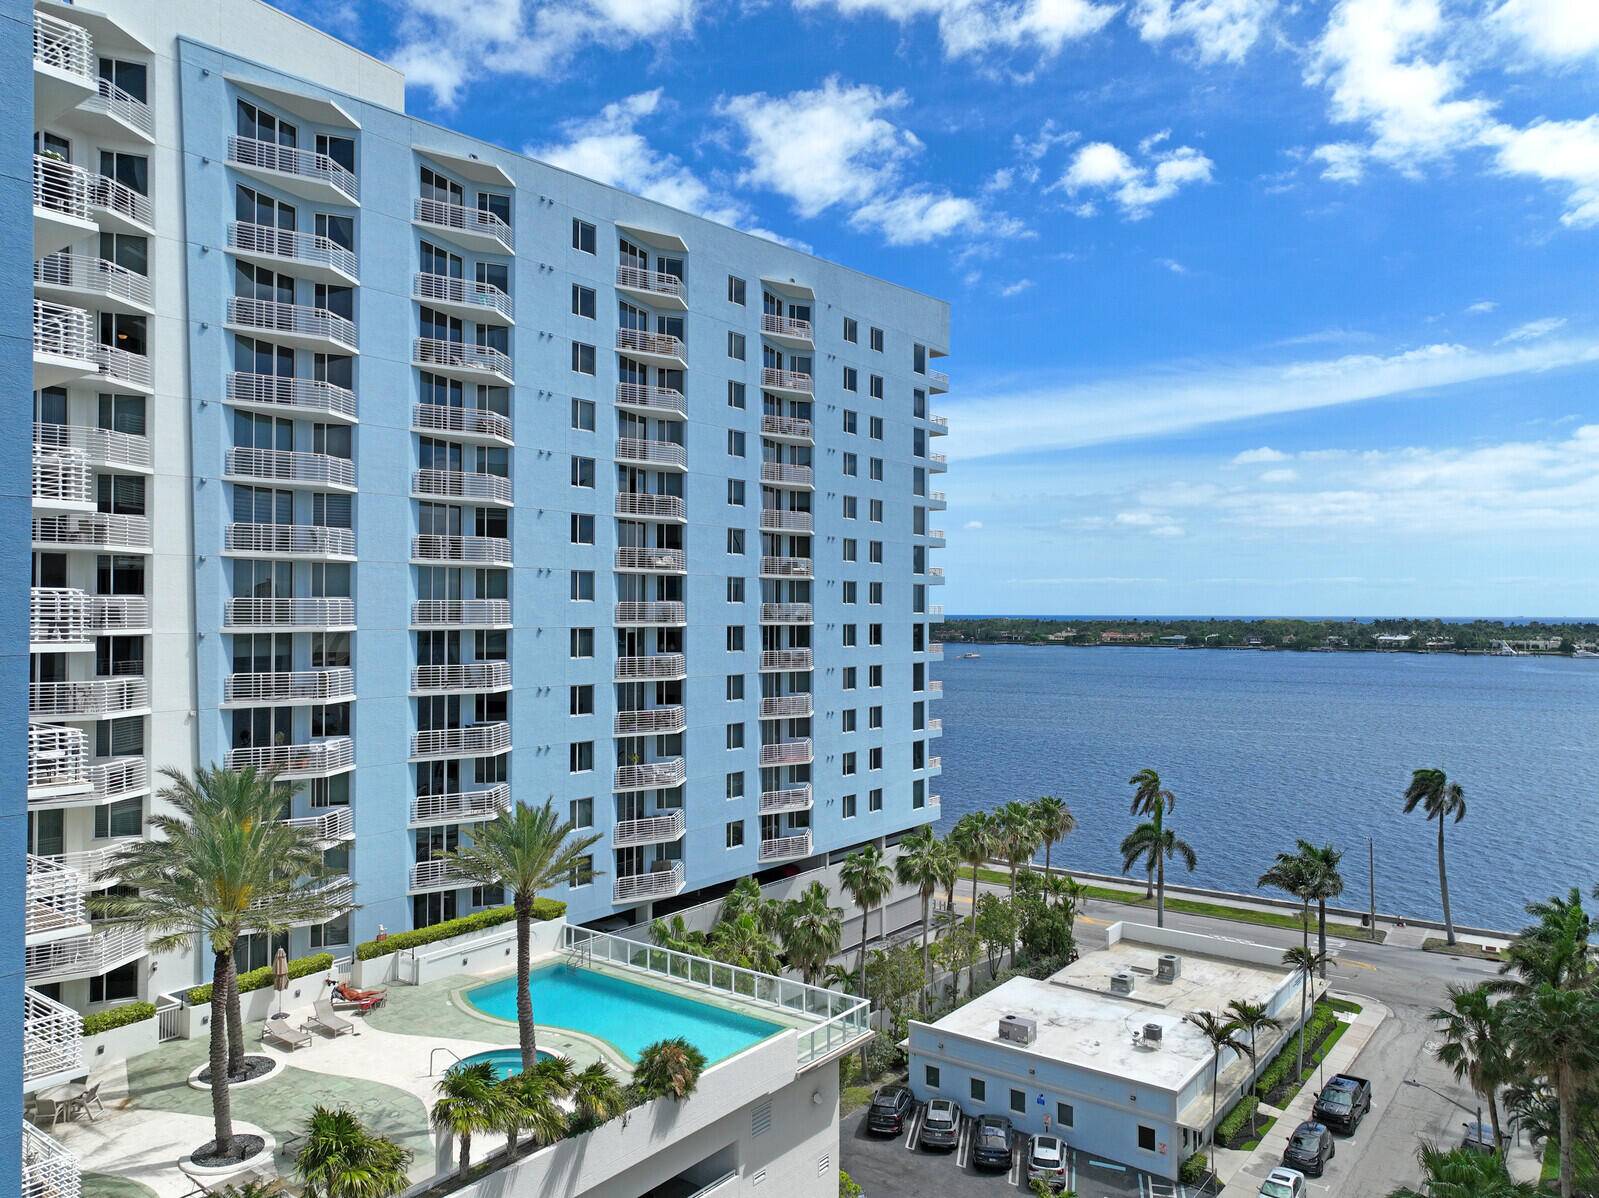 Stunning views stretching from the Intracoastal Waterway to the vast expanse of the ocean await you in this immaculate 3 bedroom, 3 bathroom condo within the desirable Slade building.